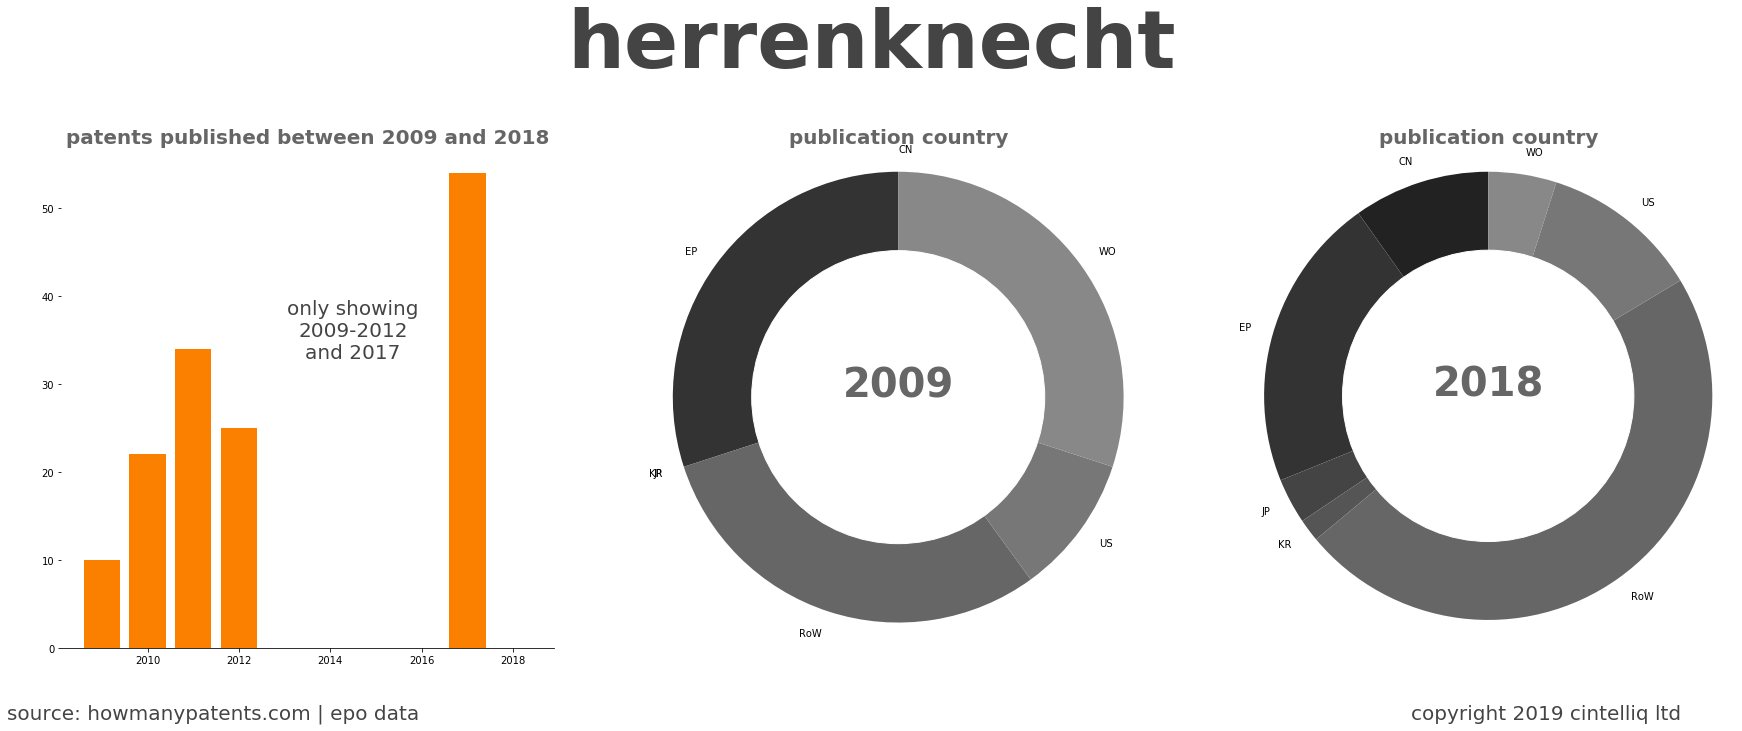 summary of patents for Herrenknecht